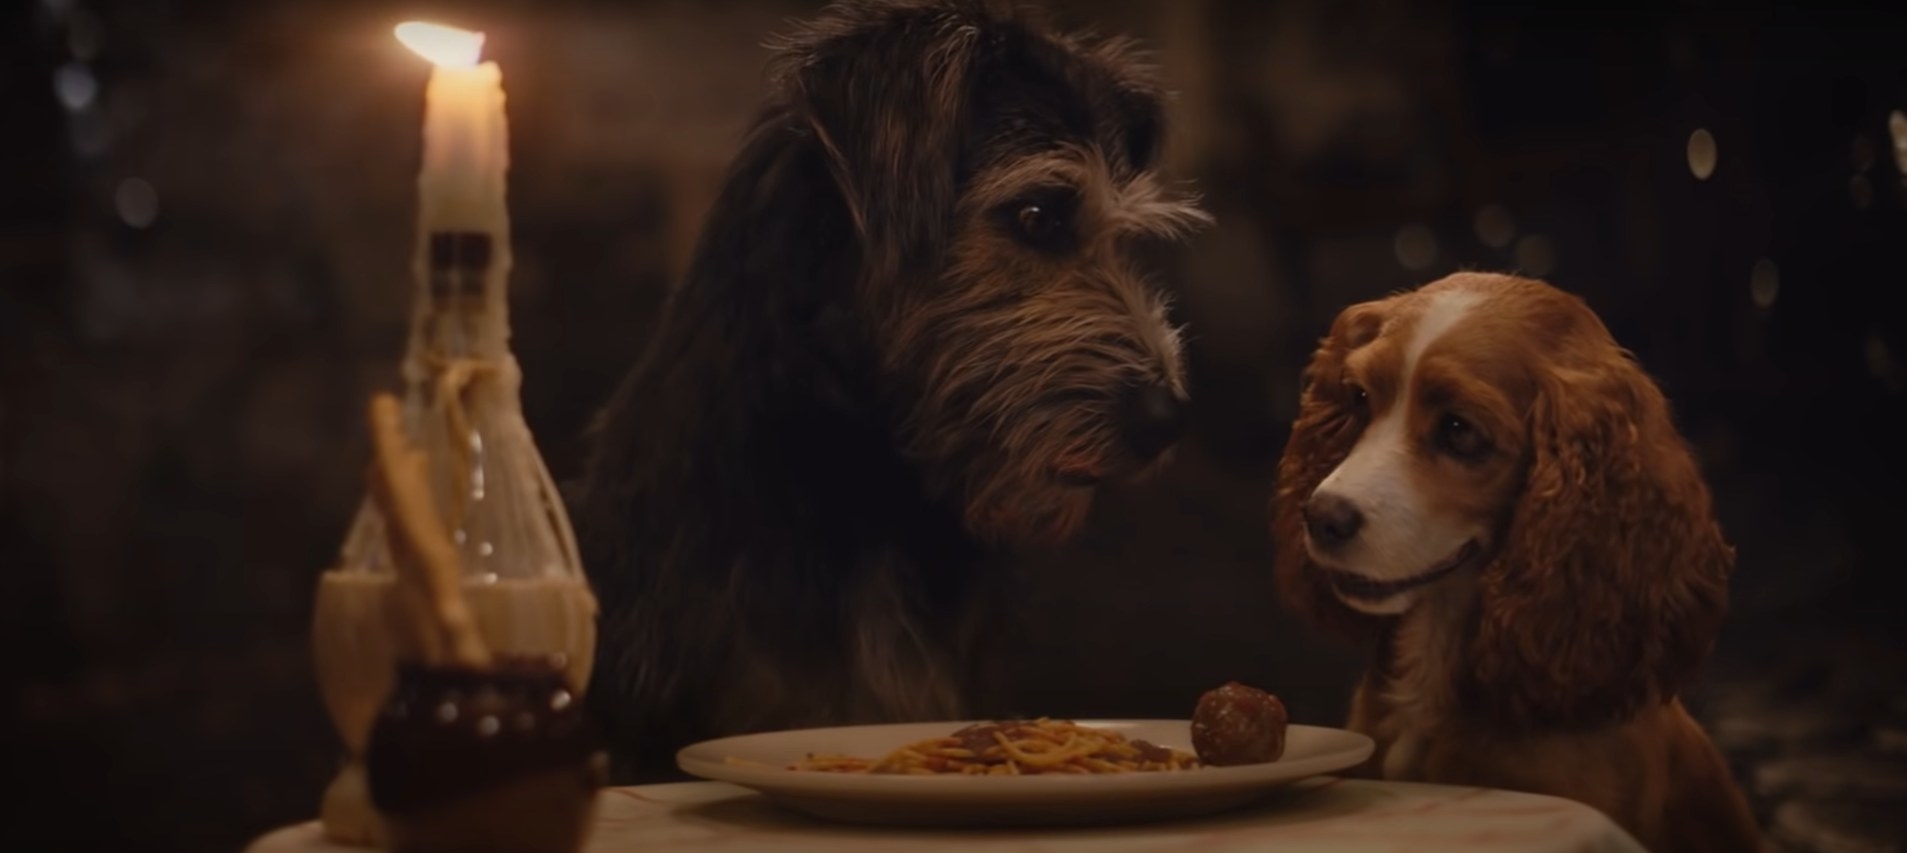 Two dogs facing each other with a plate of spaghetti and a candle between them